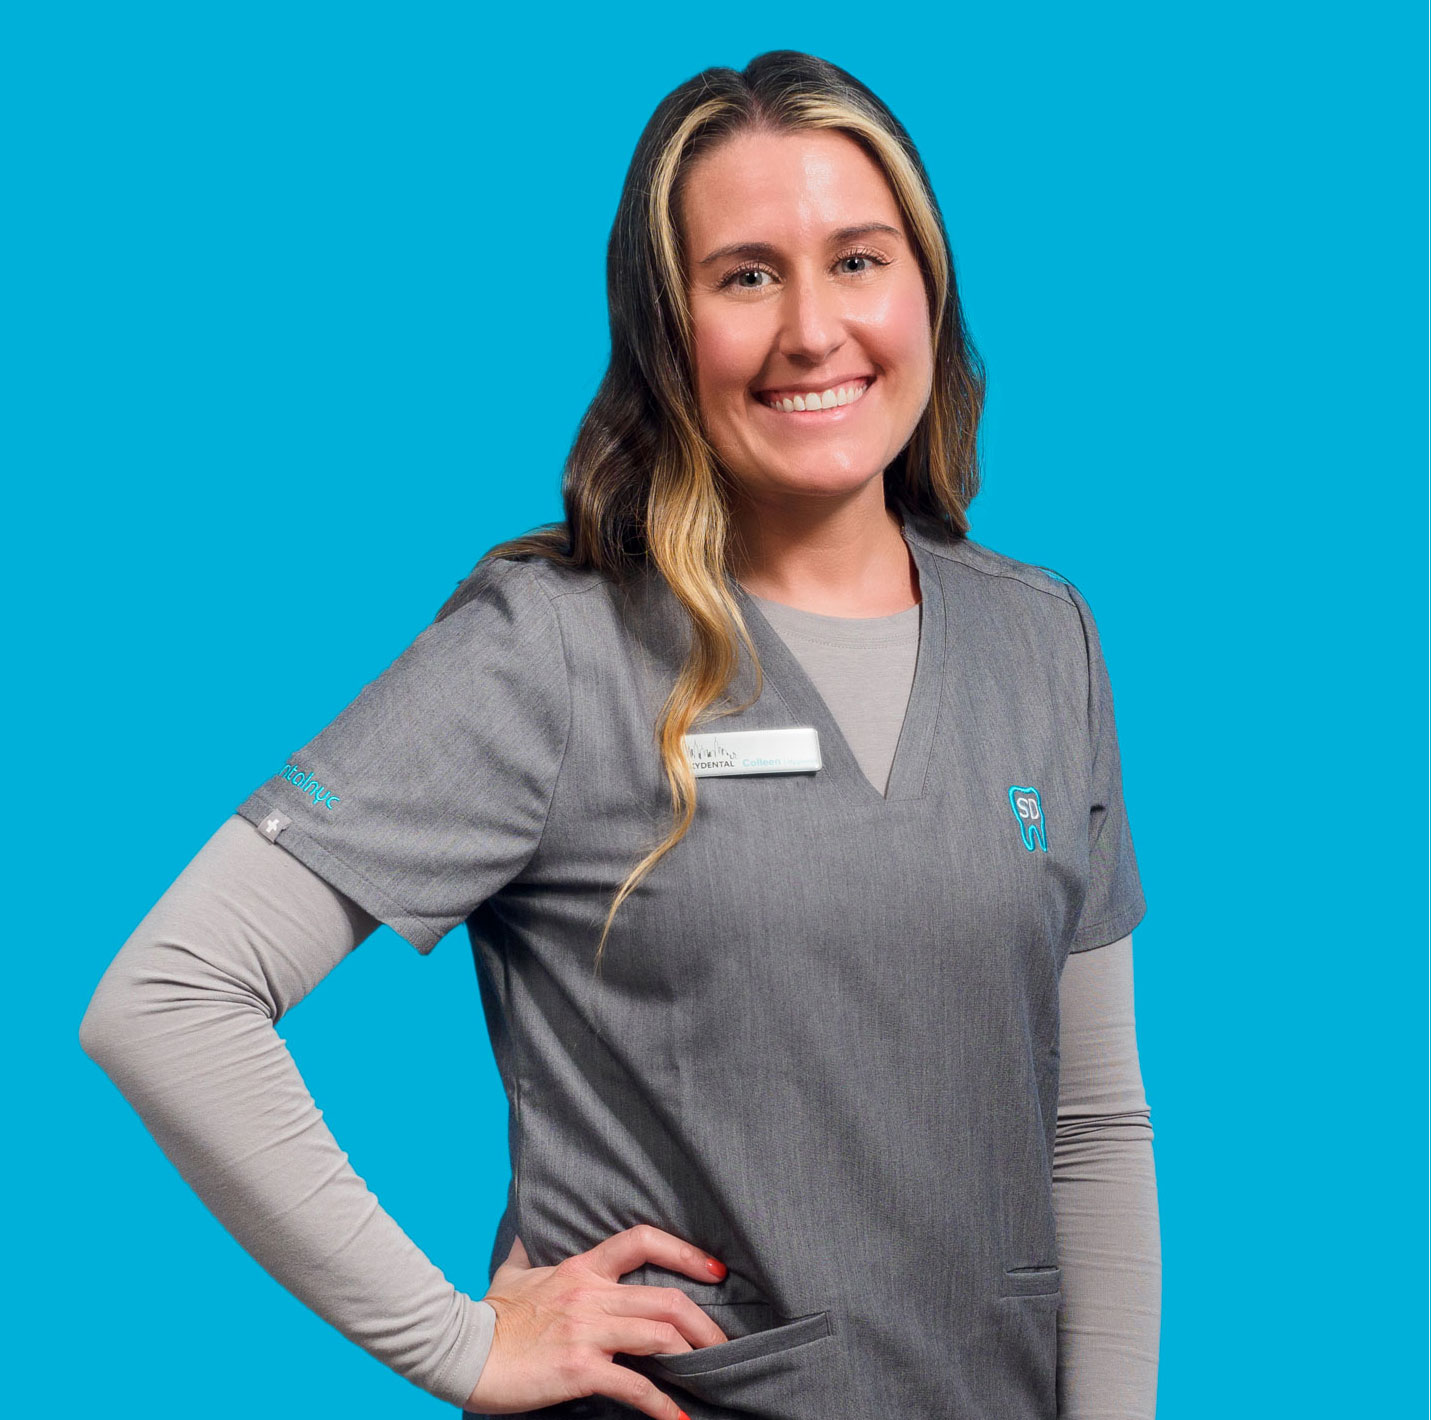 Colleen, hygienist at Sky Dental poses against sky-blue background, hand on hip, smiling.